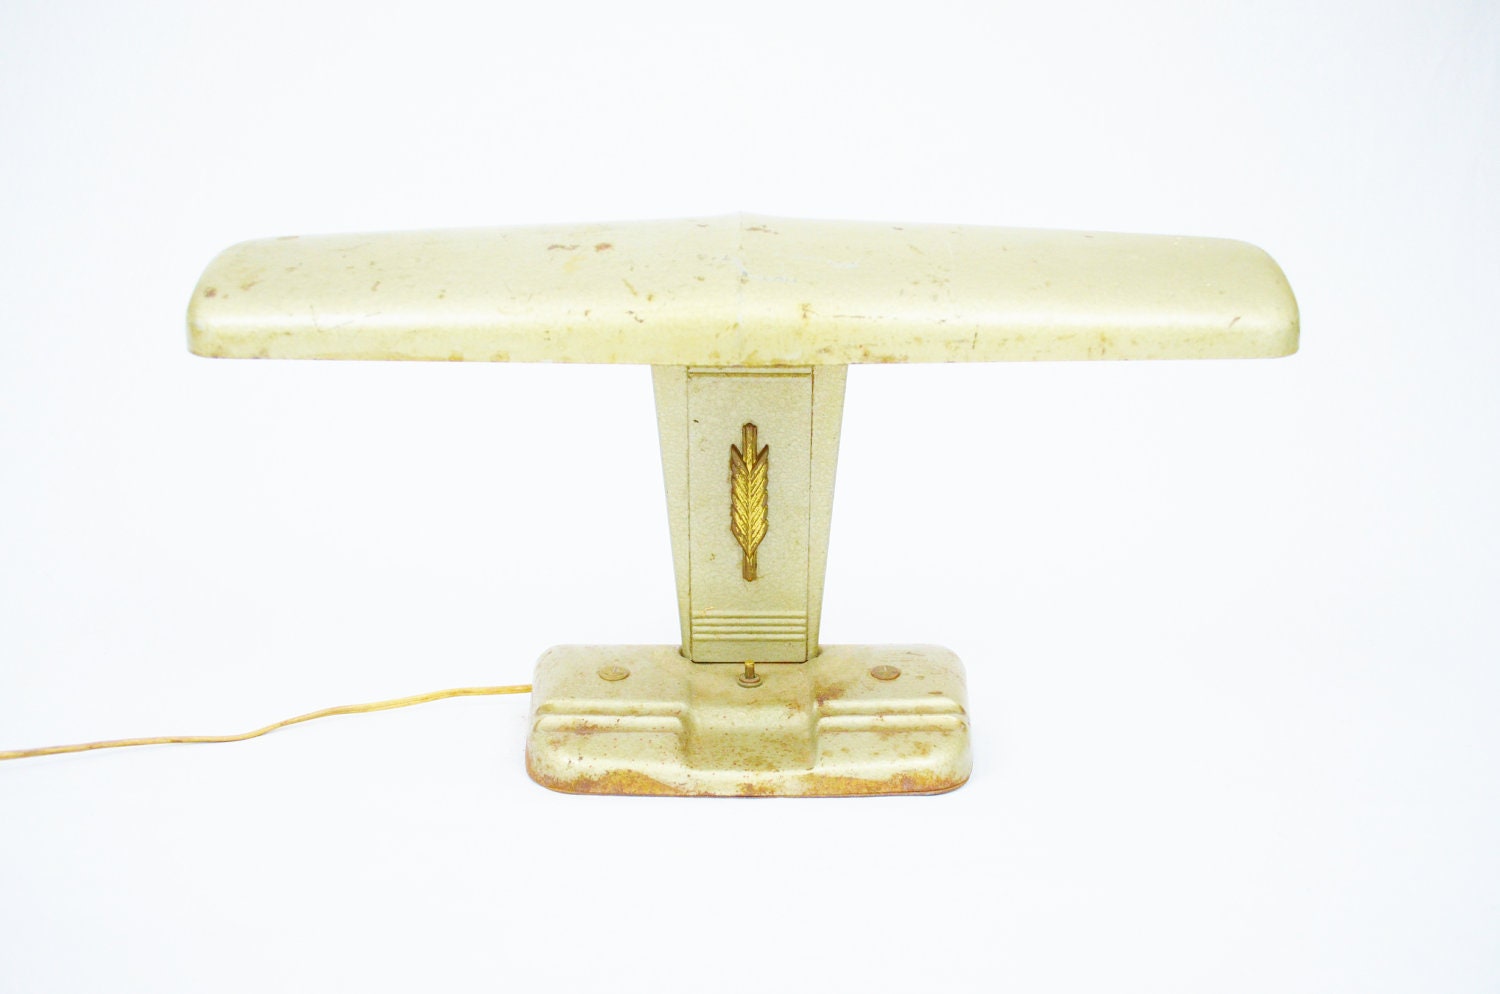 Art Deco Desk Lamp - Piano Lamp - Moe Brothers - LuccaBalesVintage